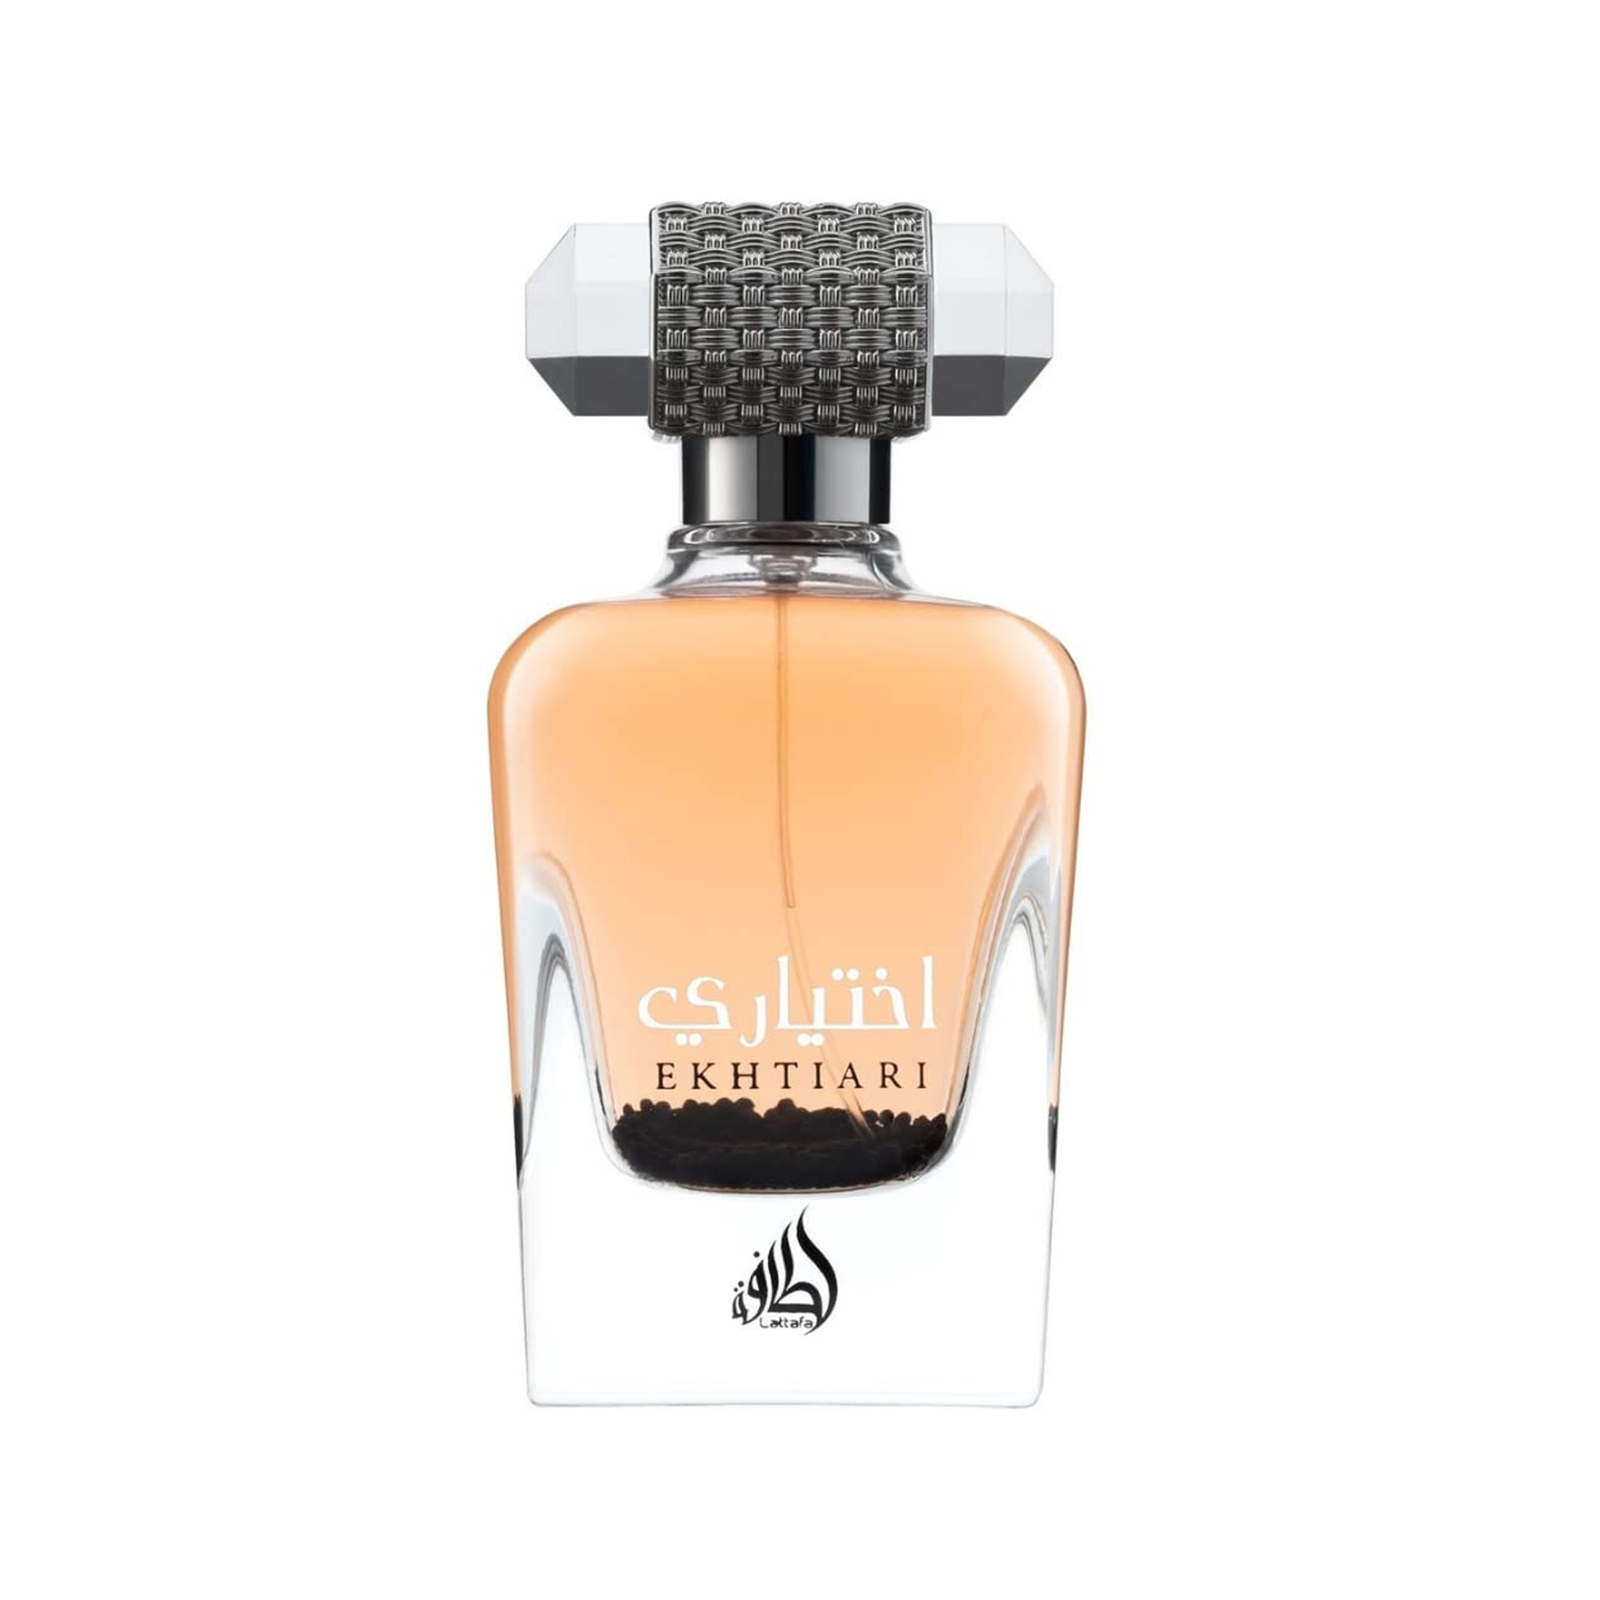 Ekhtiari perfume with a touch Oud Spices and Softness of Vanilla ED Parfum100ml